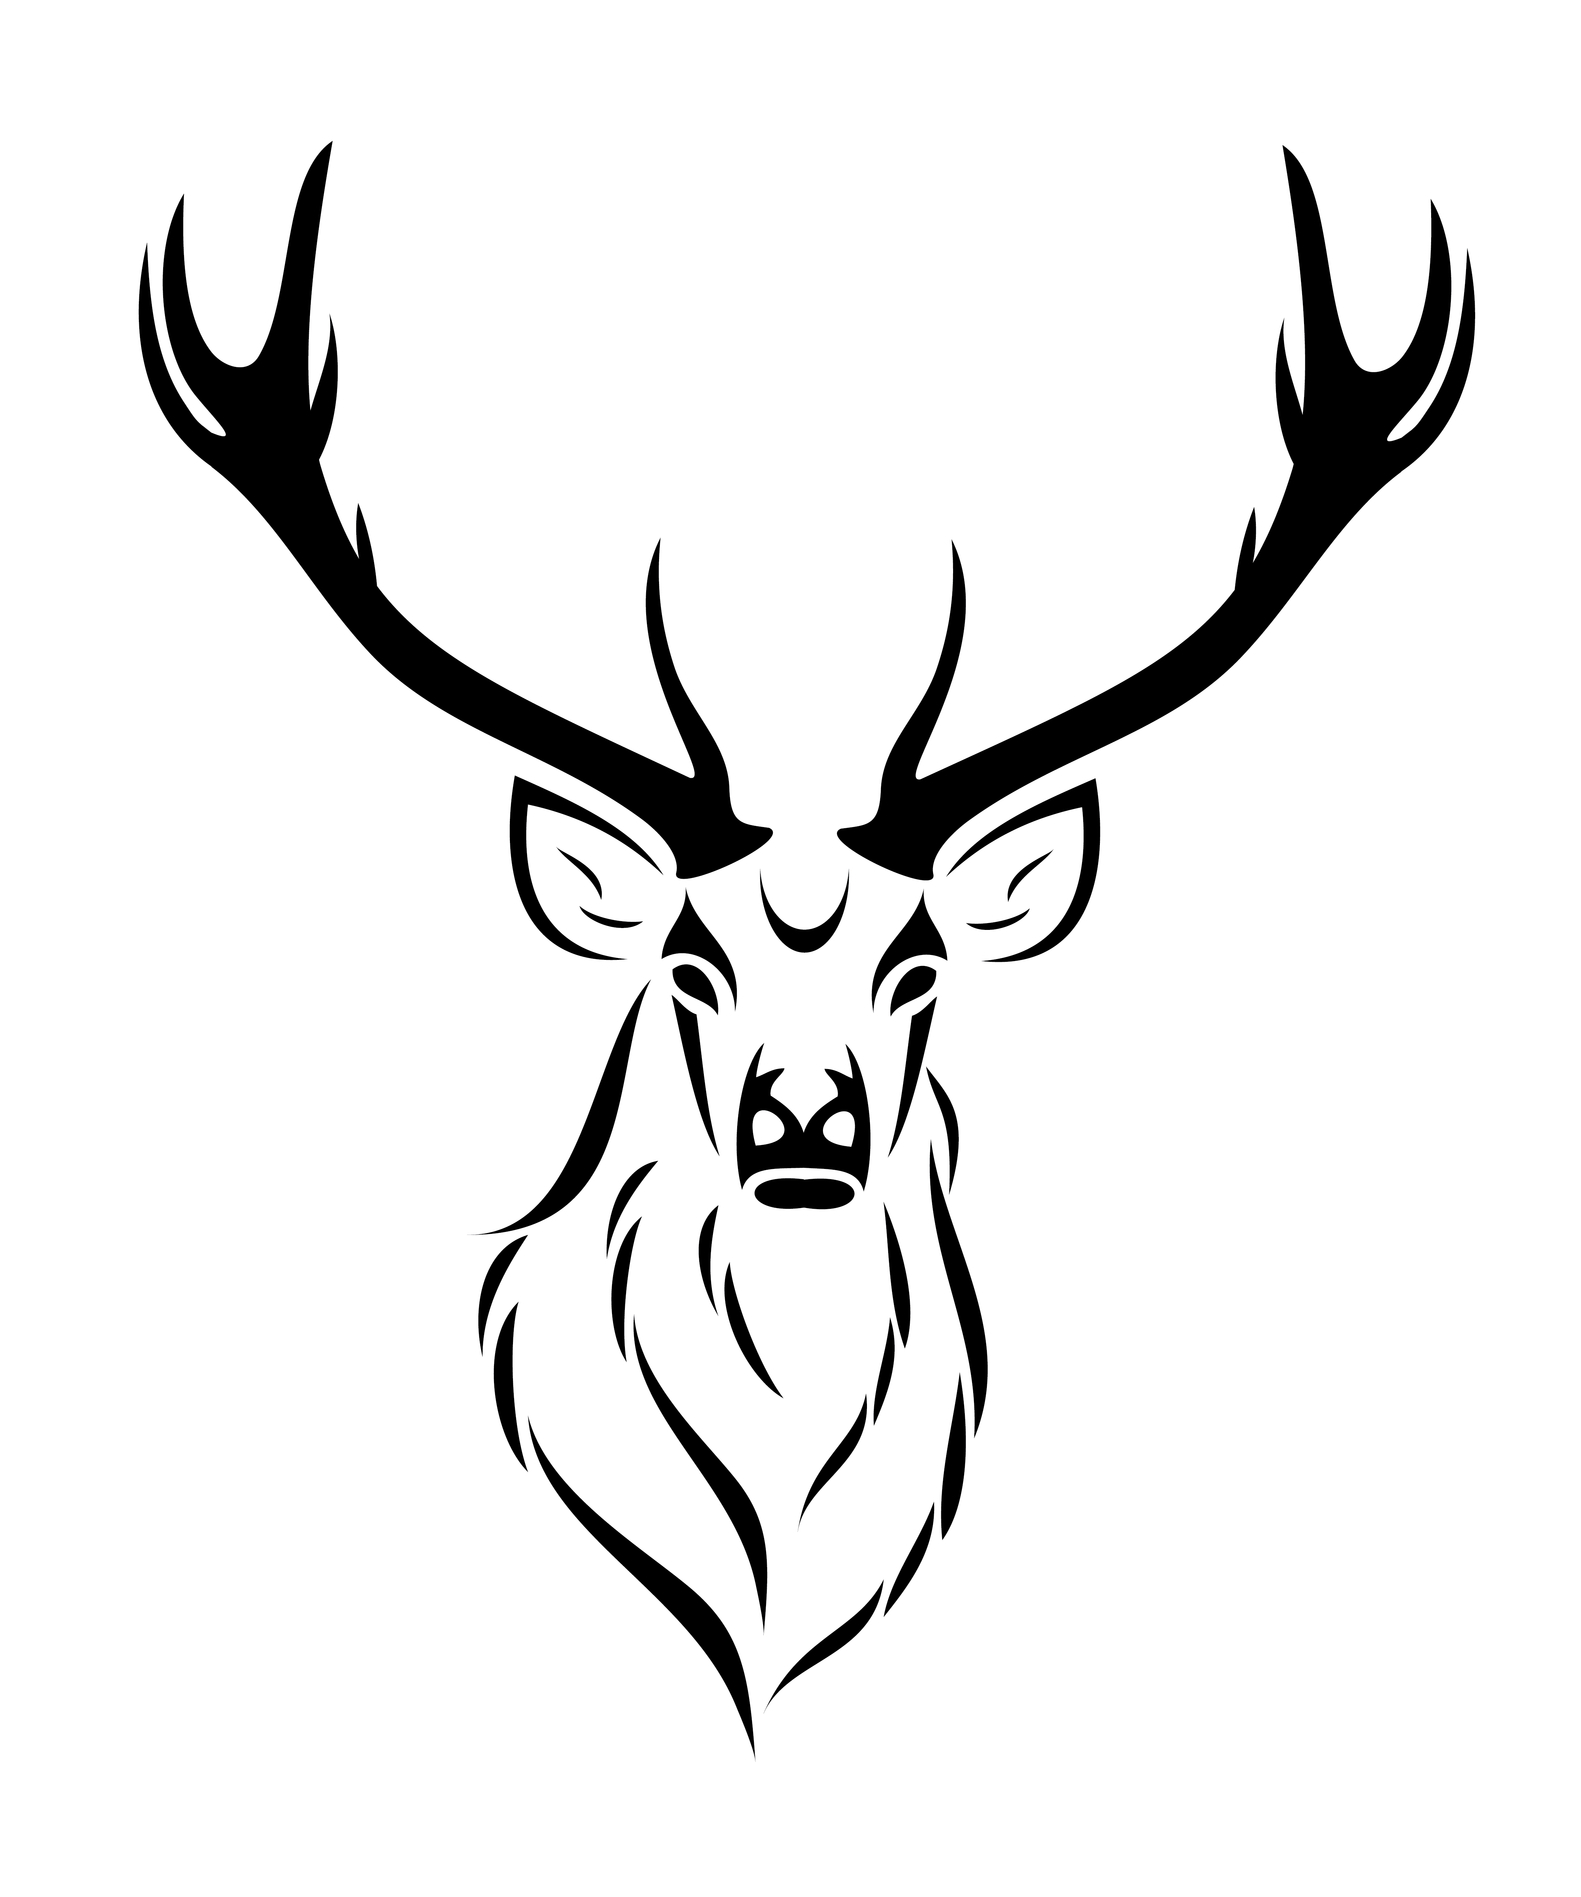 Symbolic Stag Tattoo Ideas and Stag Meaning on Whats-Your-Sign